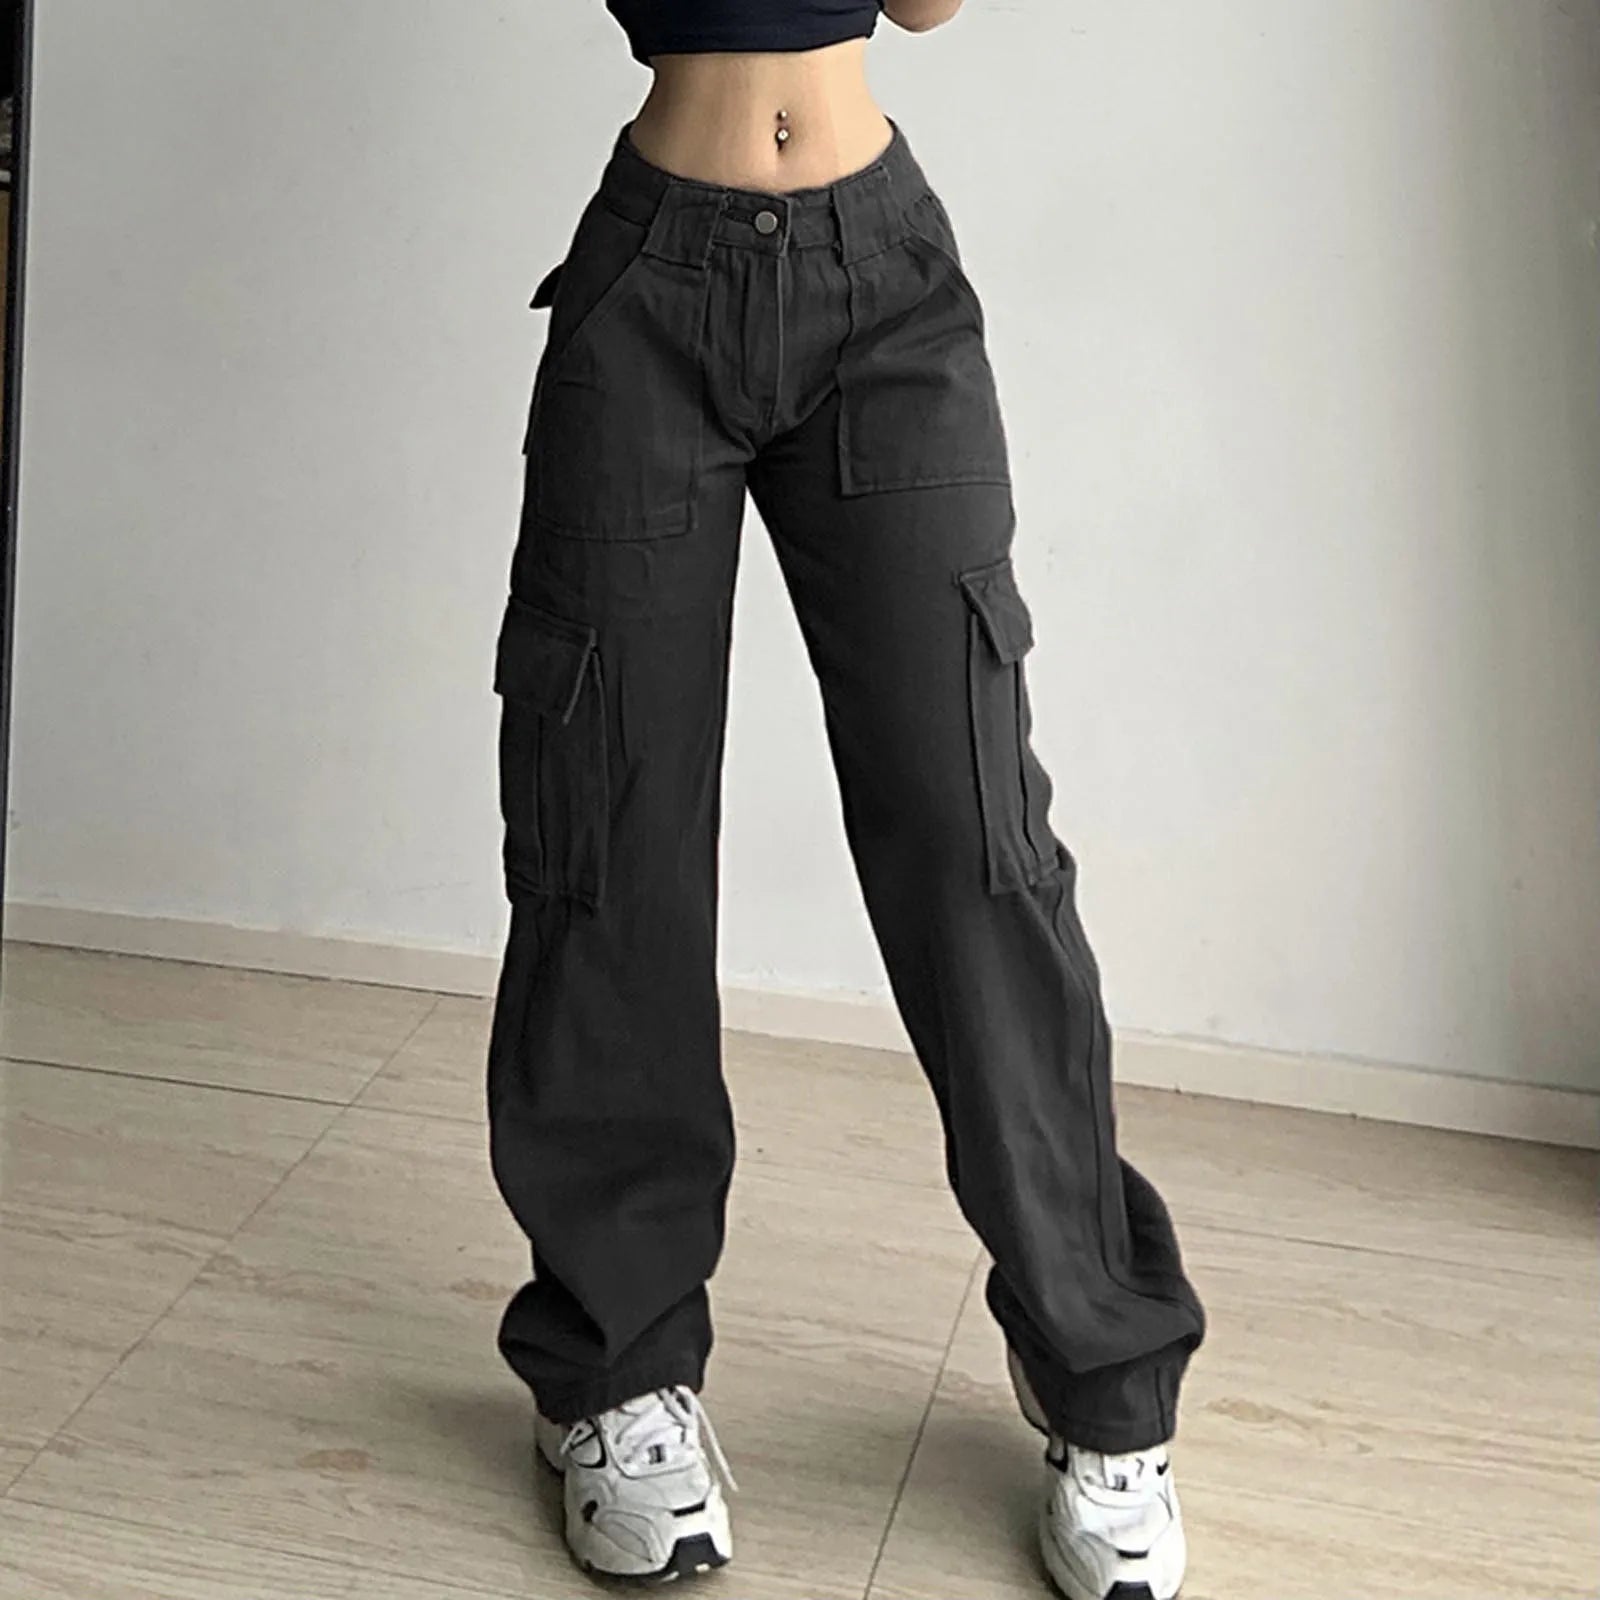 Vintage Cargo Pants Overalls Baggy Jeans Women Casual Fashion Y2k 90s Streetwear Big Pockets High Waist Straight Denim Trousers voguable